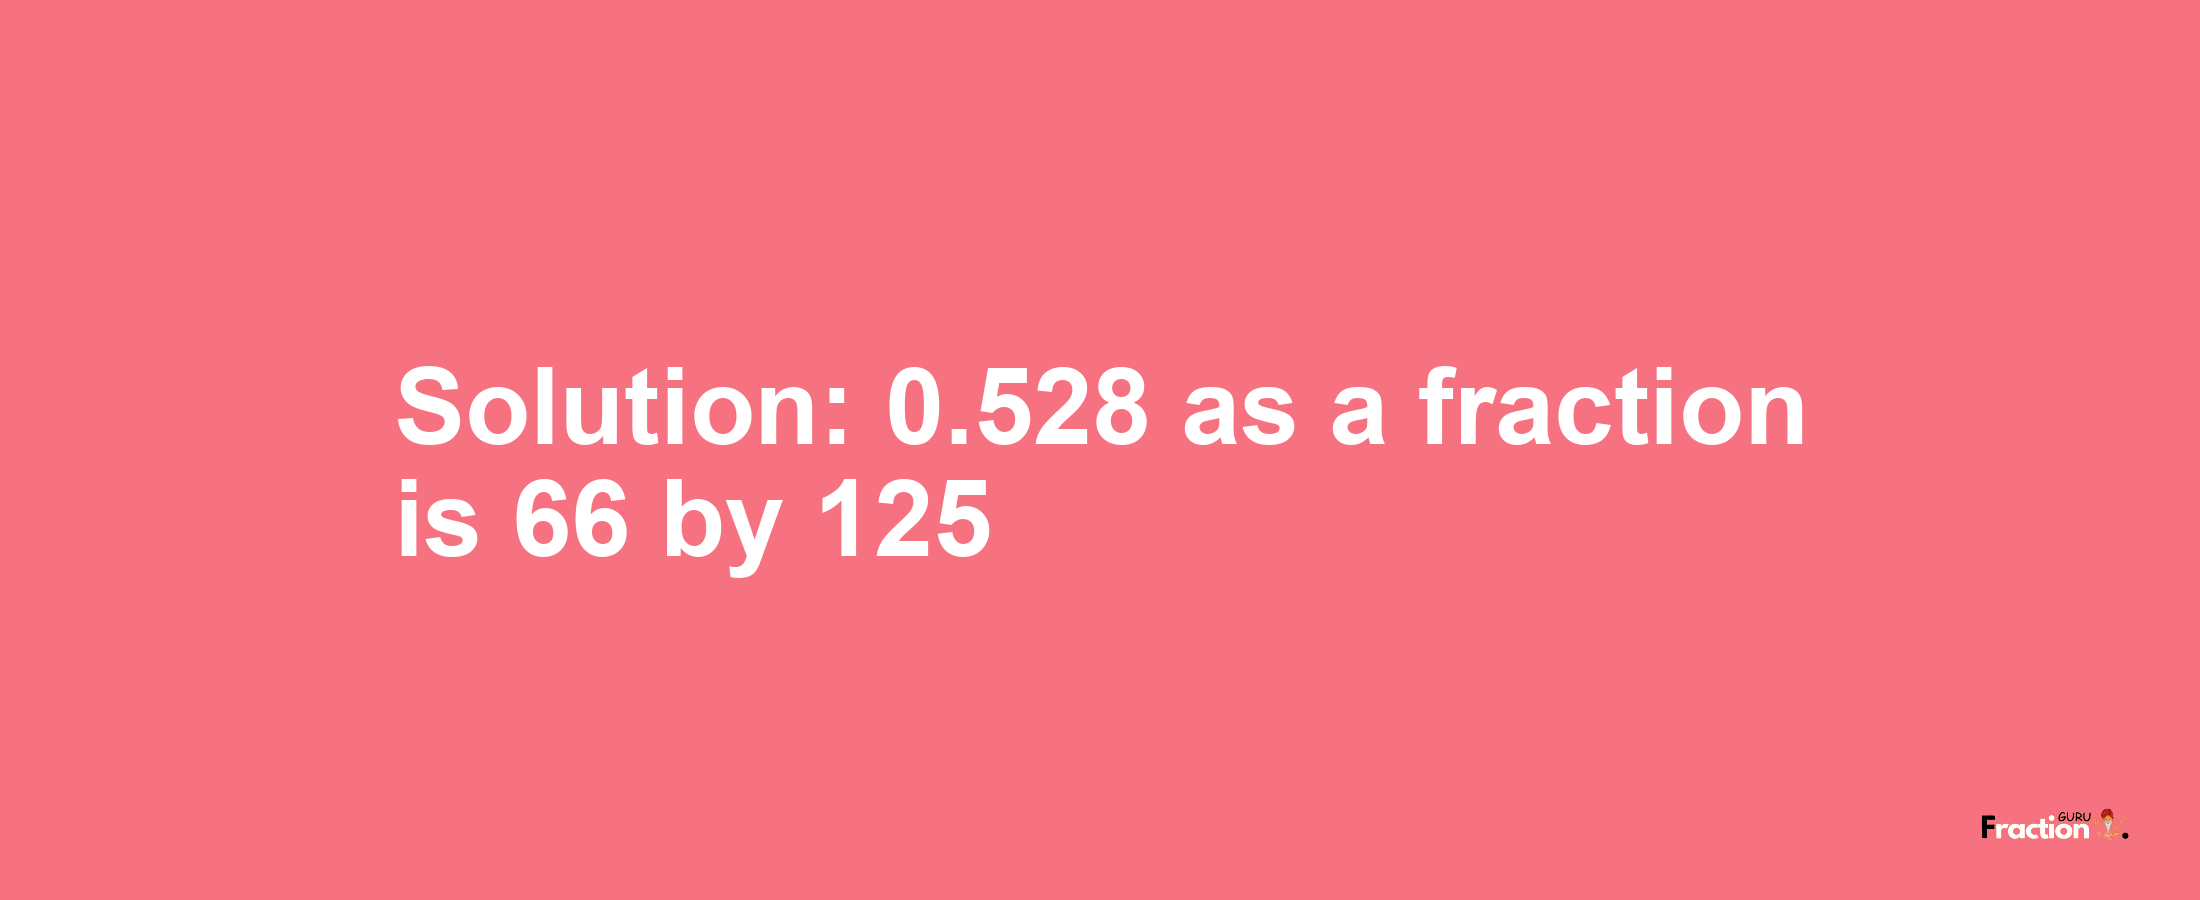 Solution:0.528 as a fraction is 66/125